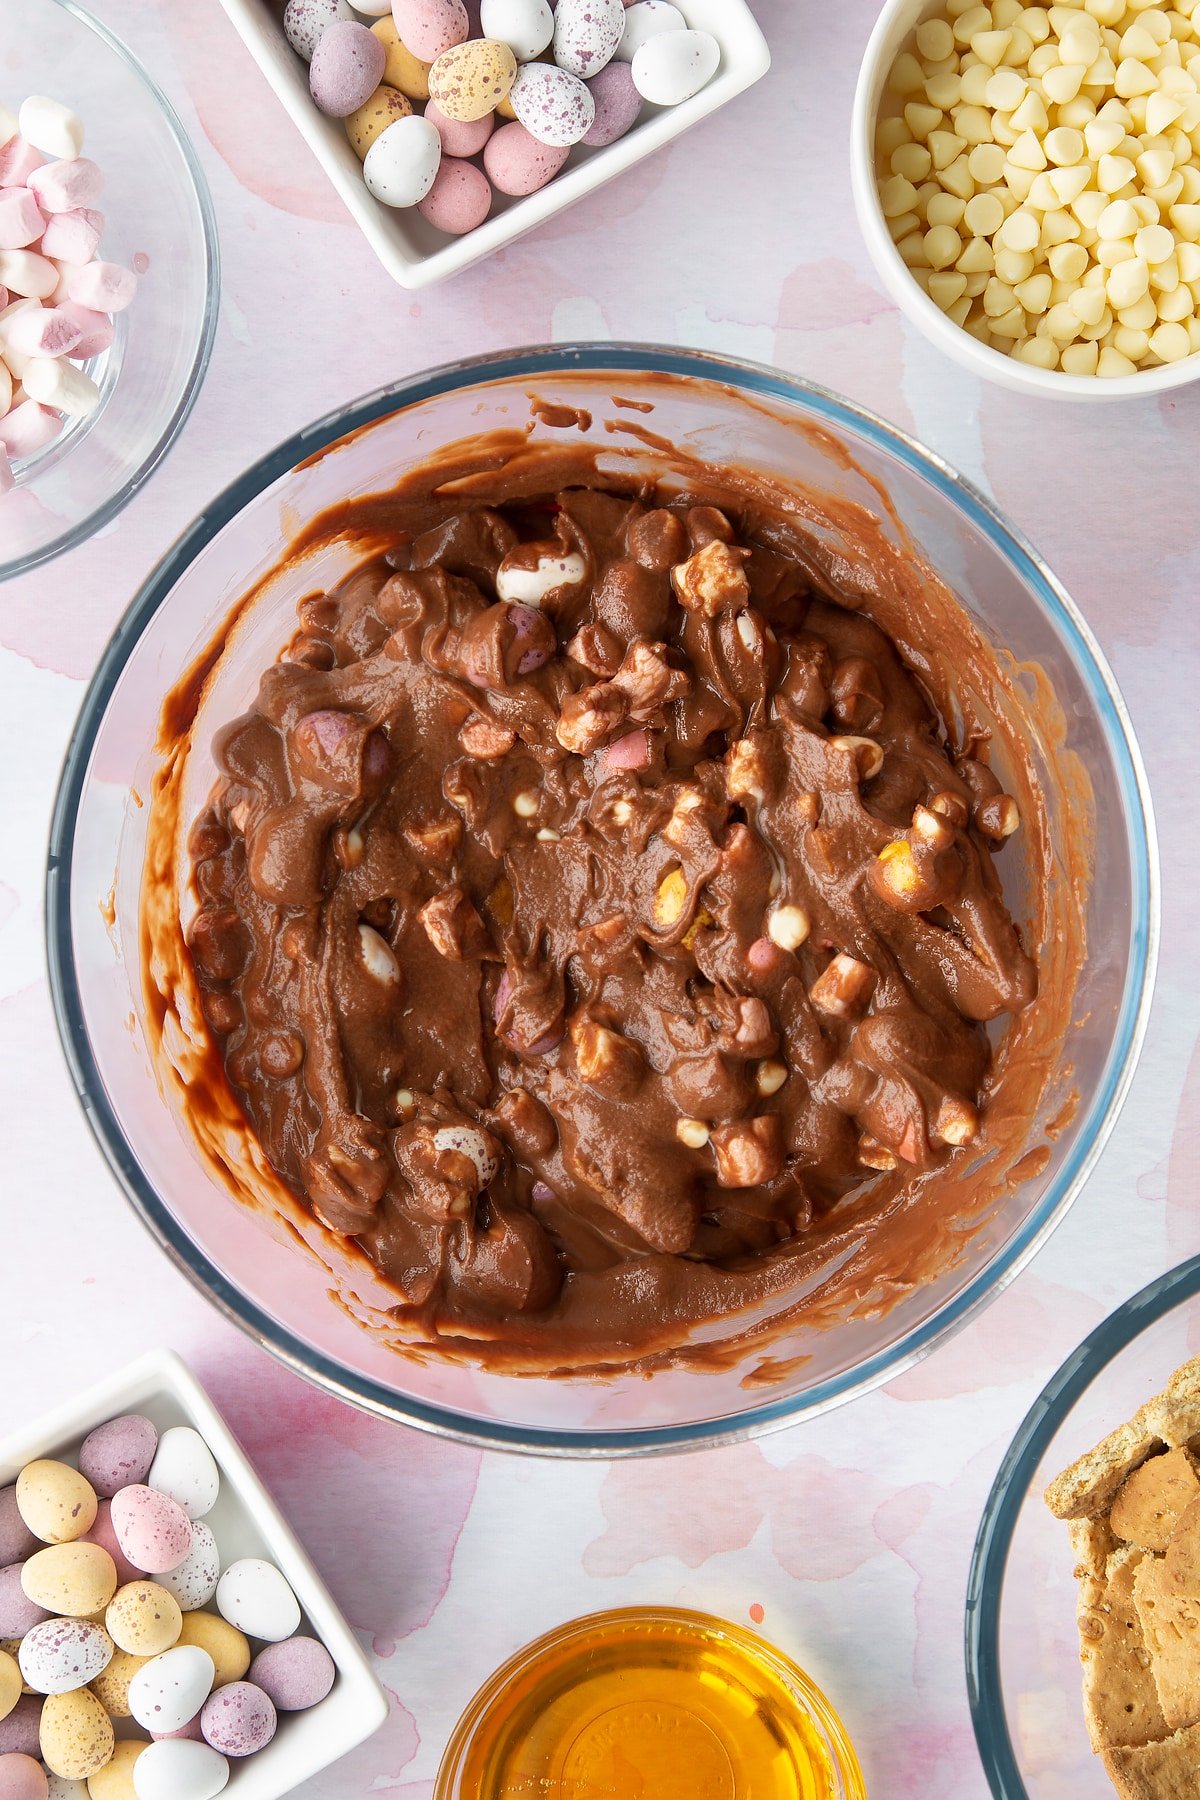 Rocky road mix in a glass mixing bowl. Ingredients to make Mini Egg rocky road surrounds the bowl.